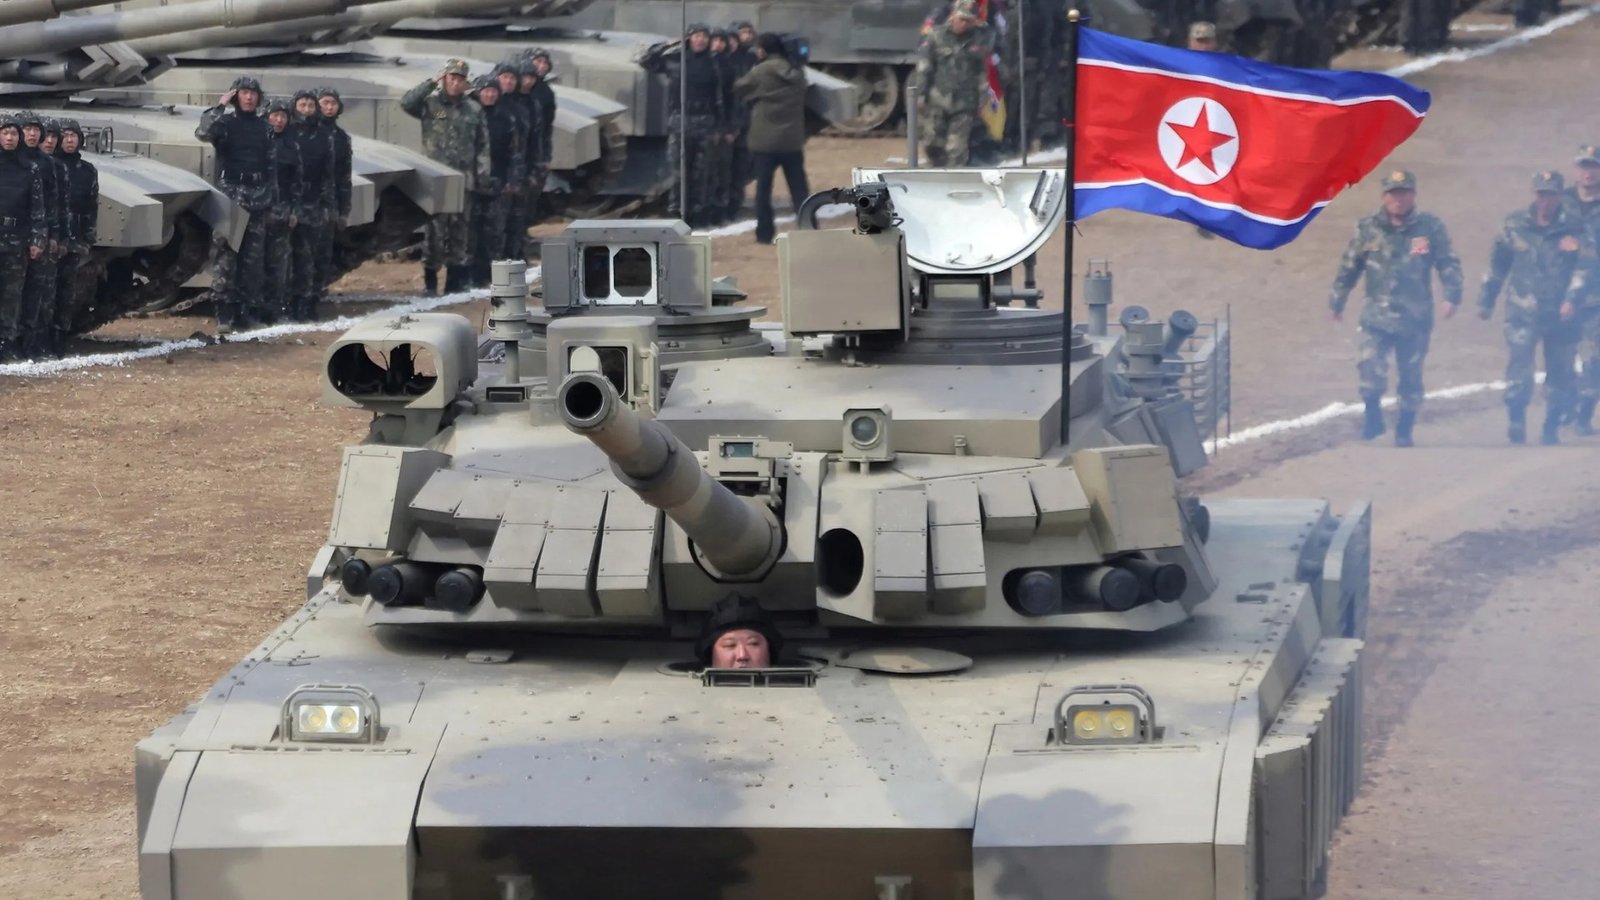 Kim Jong Un pops head out of tank as he unveils new war machine in face of US military exercises